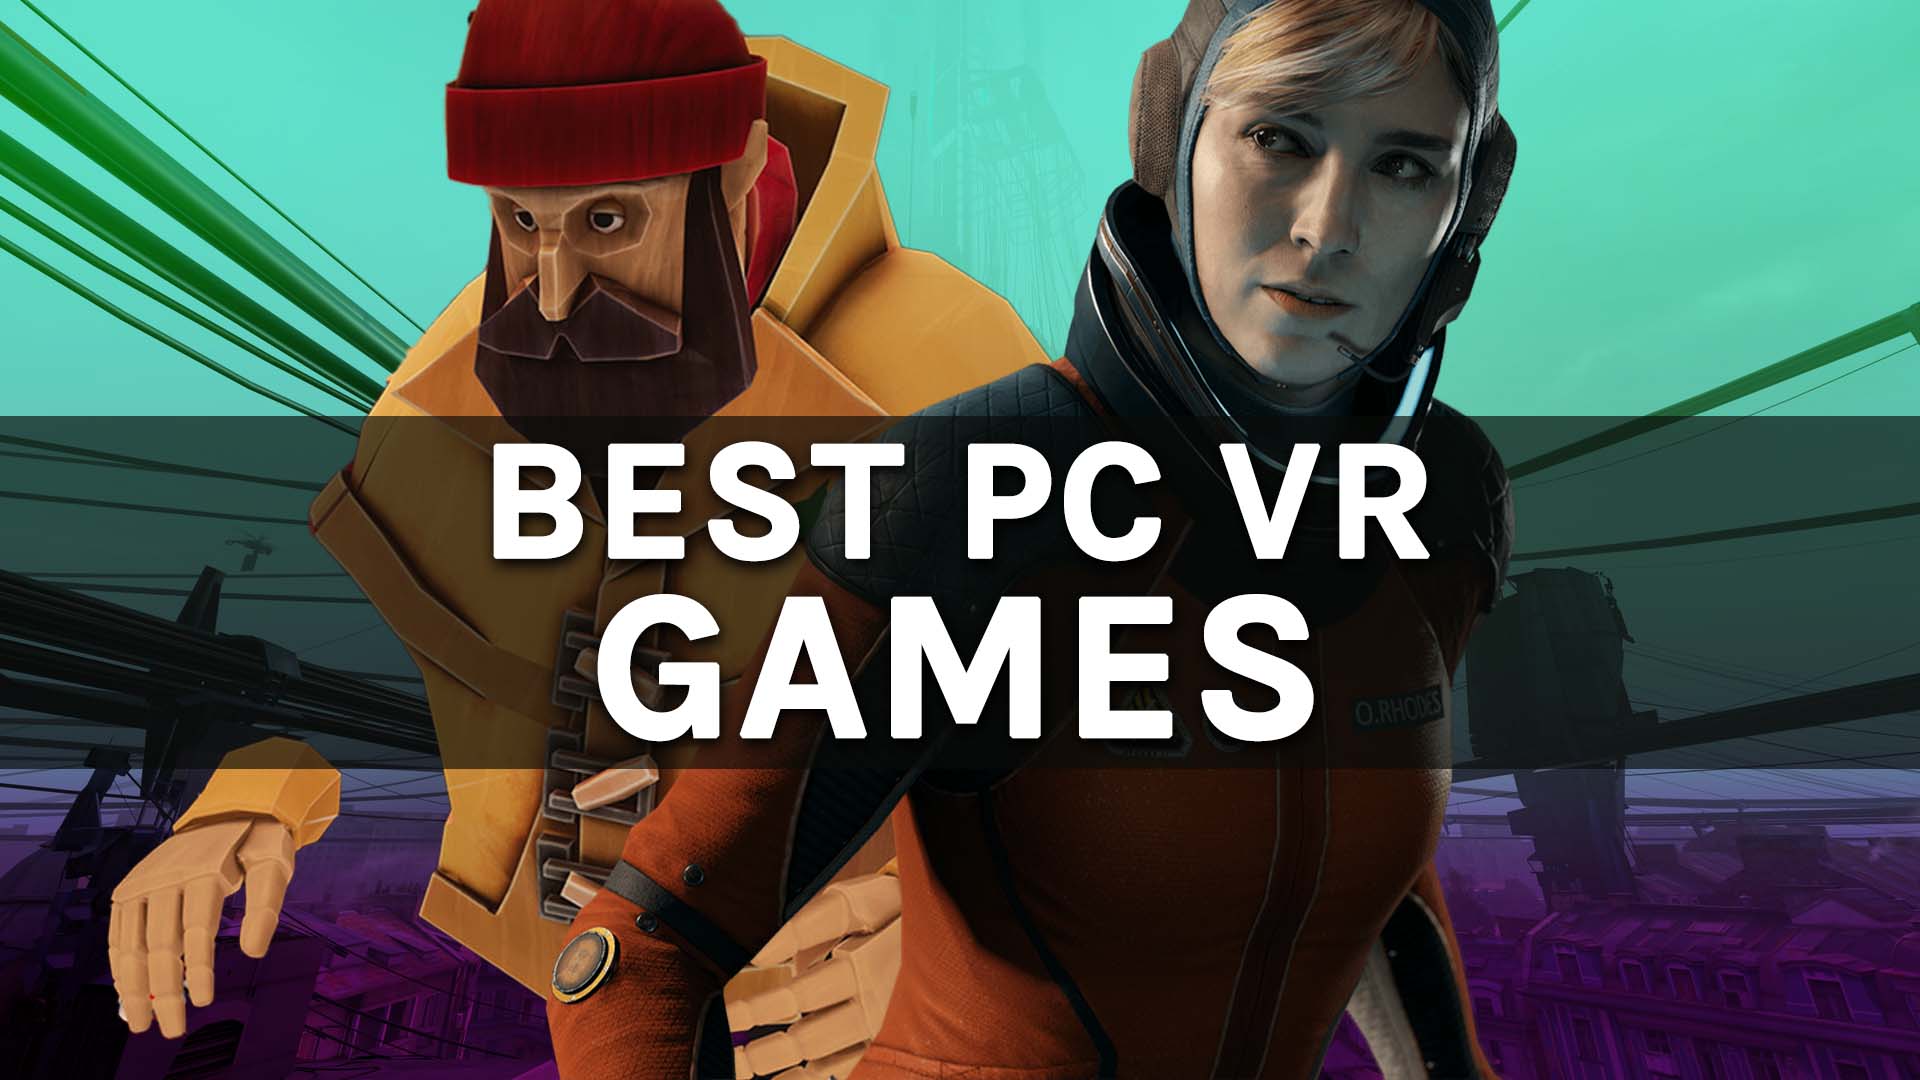 Best PC VR Games Text